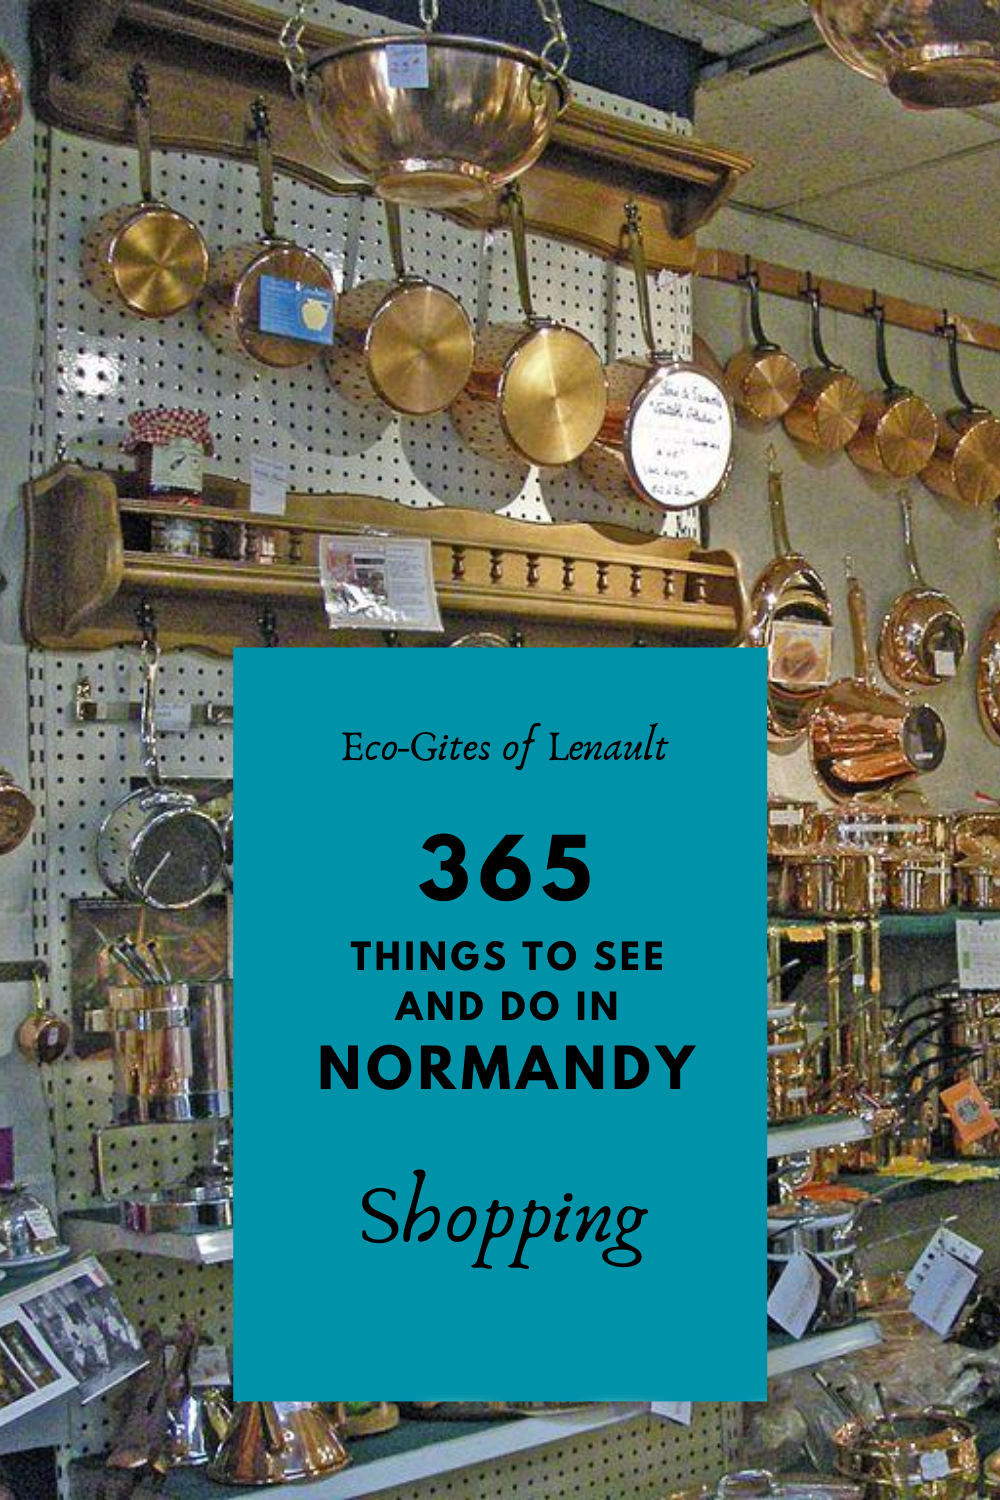 Shopping in Normandy, France